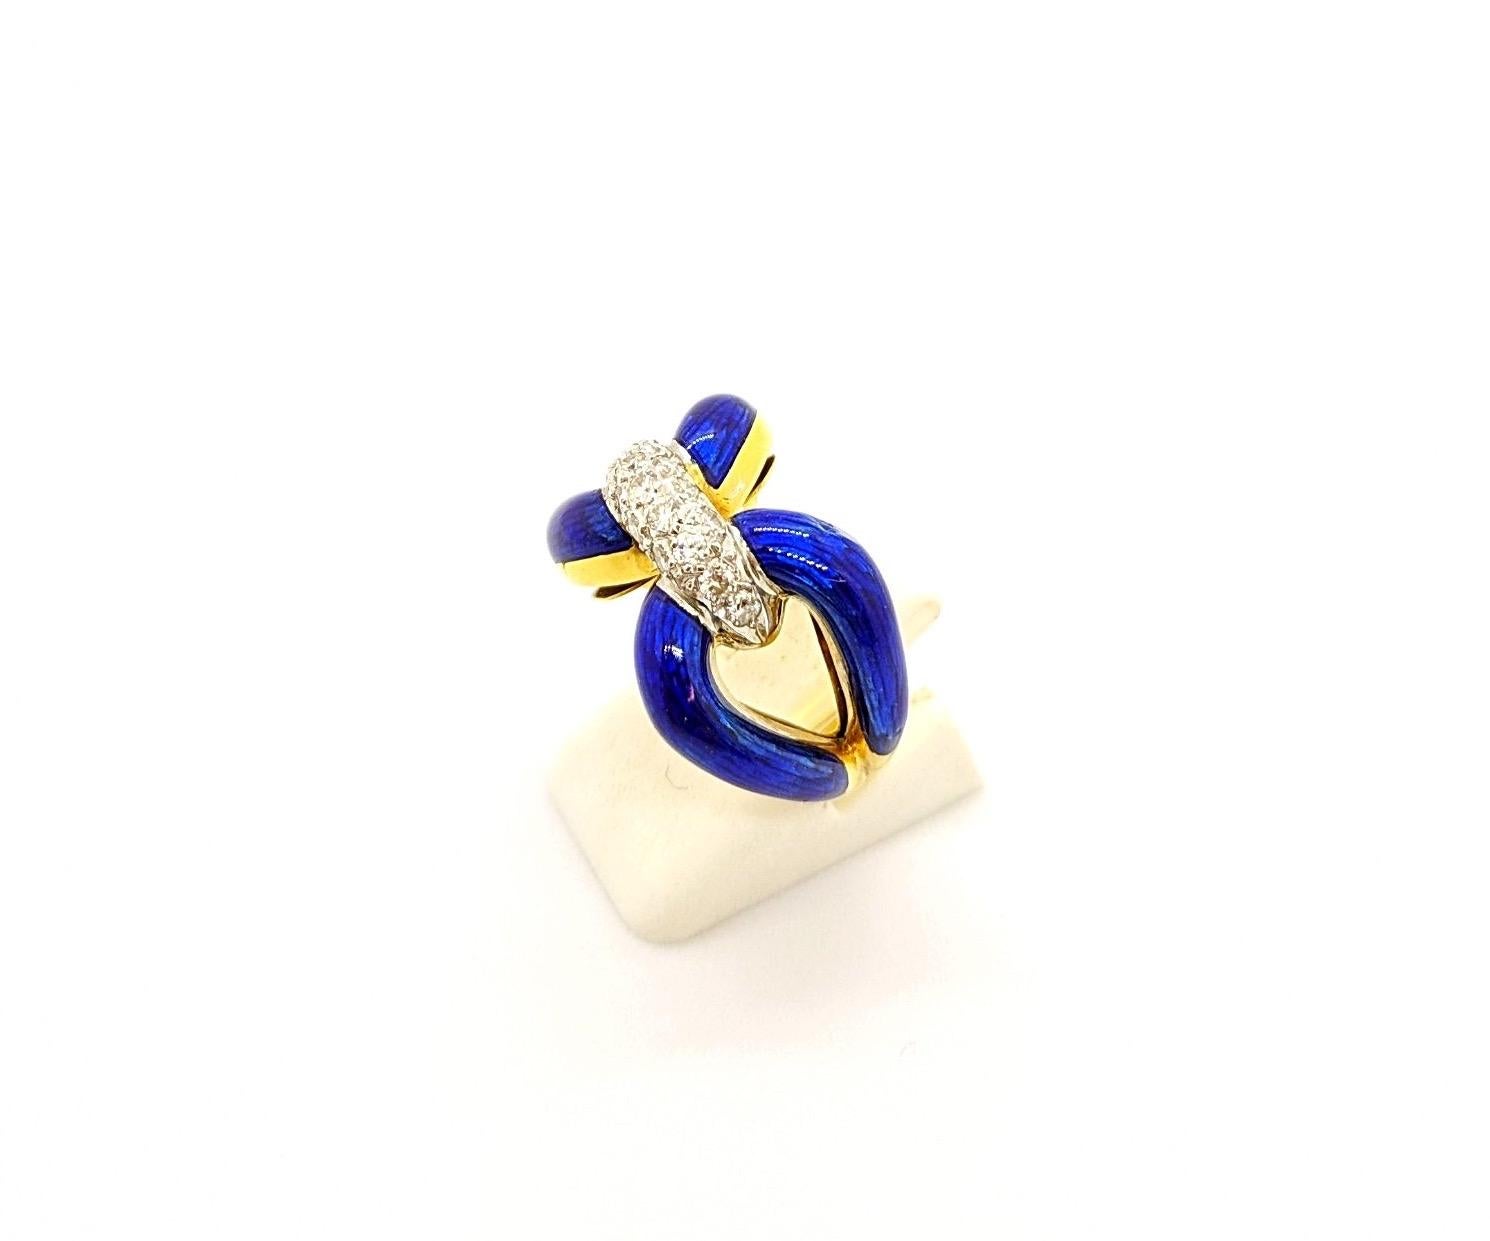 The perfect wearable vintage best describes this 18 karat yellow gold ring.  Designed with brilliant royal blue enamel and a pave diamond center, this ring is actually right up to the minute style. 
Diamond weight 0.43 carats
There are 2 jewelers